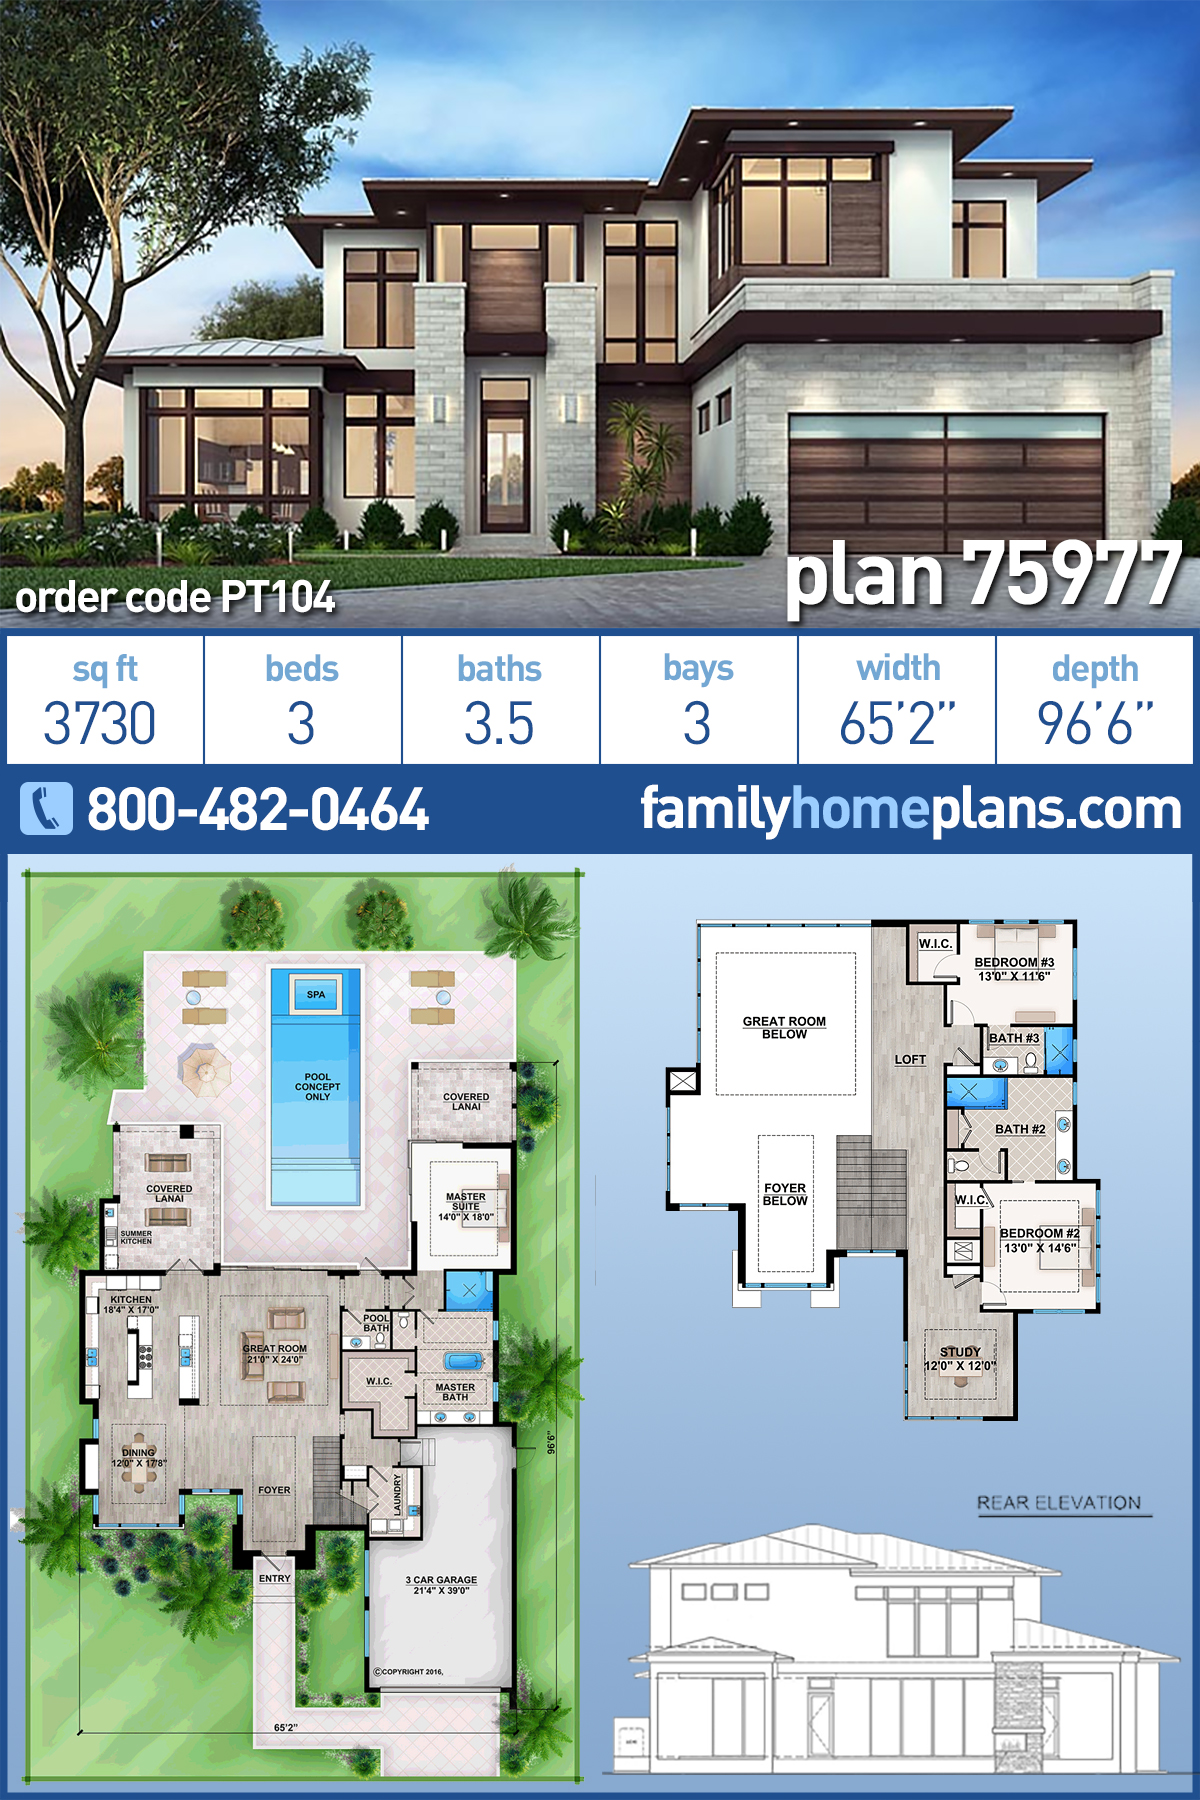  Modern  Style House  Plan  75977 with 3730 Sq Ft 3 Bed 3 